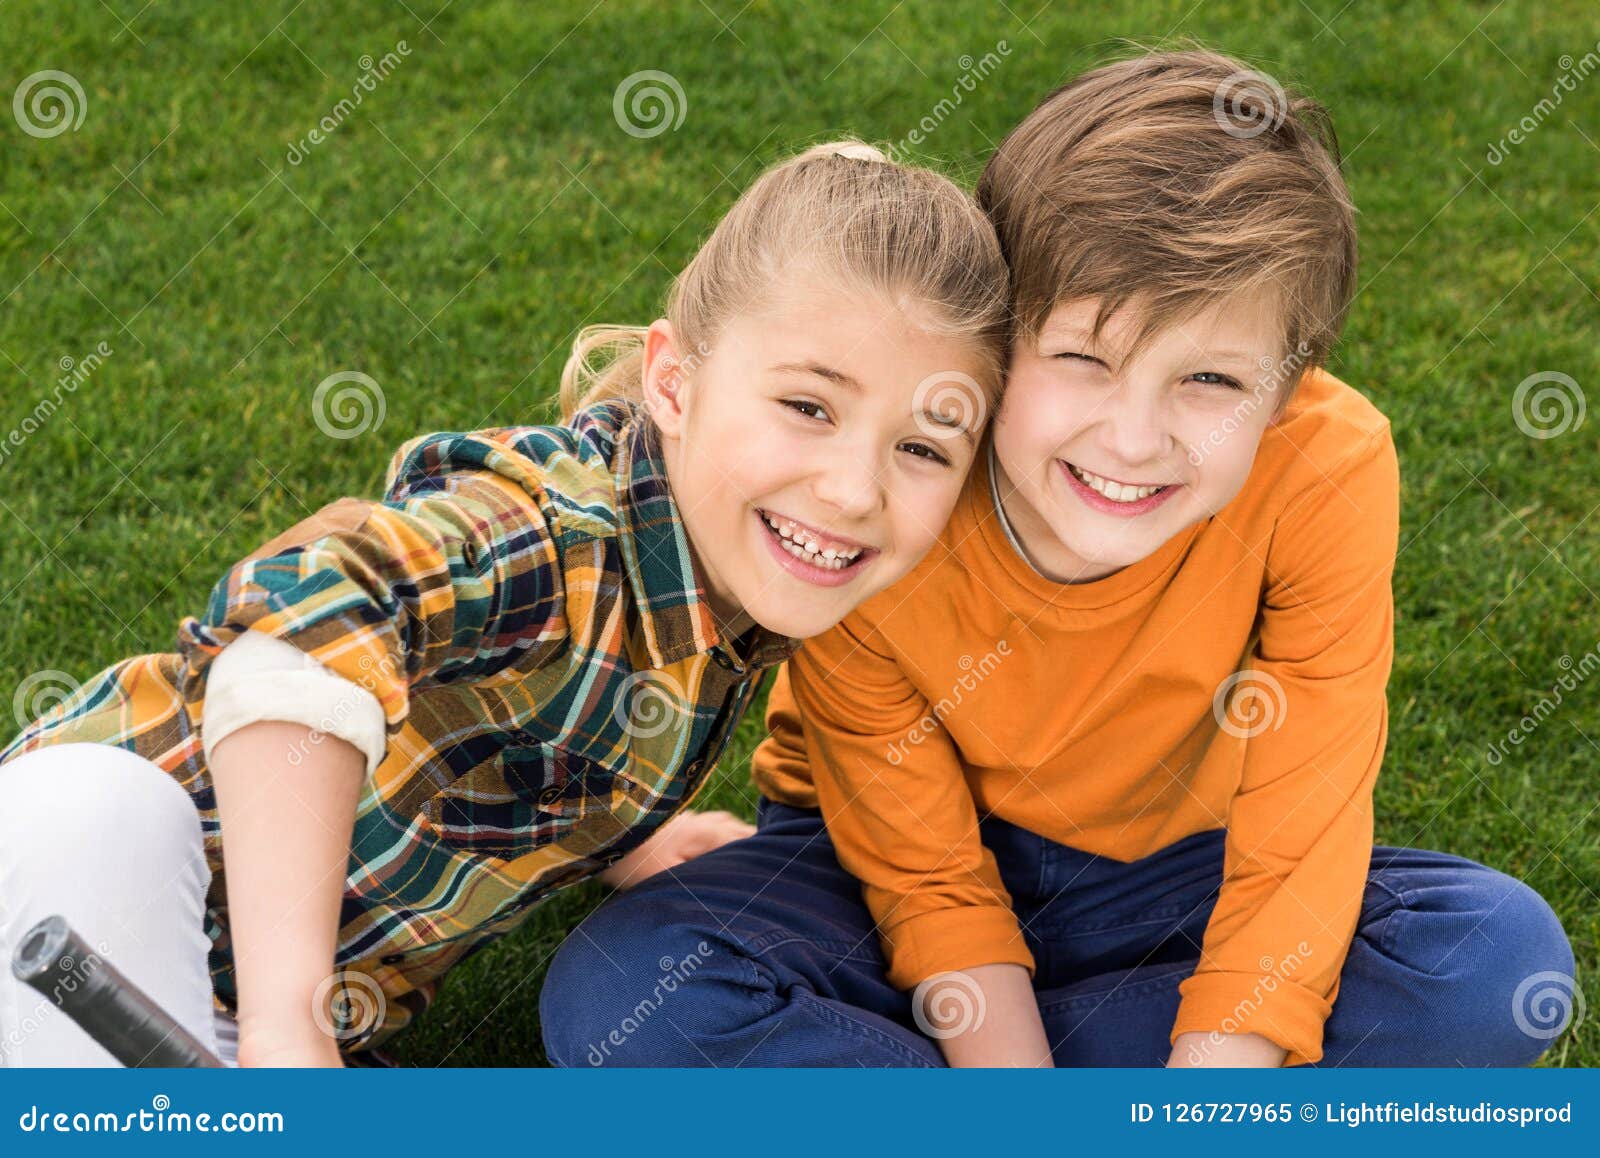 Adorable Happy Brother and Sister Sitting Together on Green Grass and ...